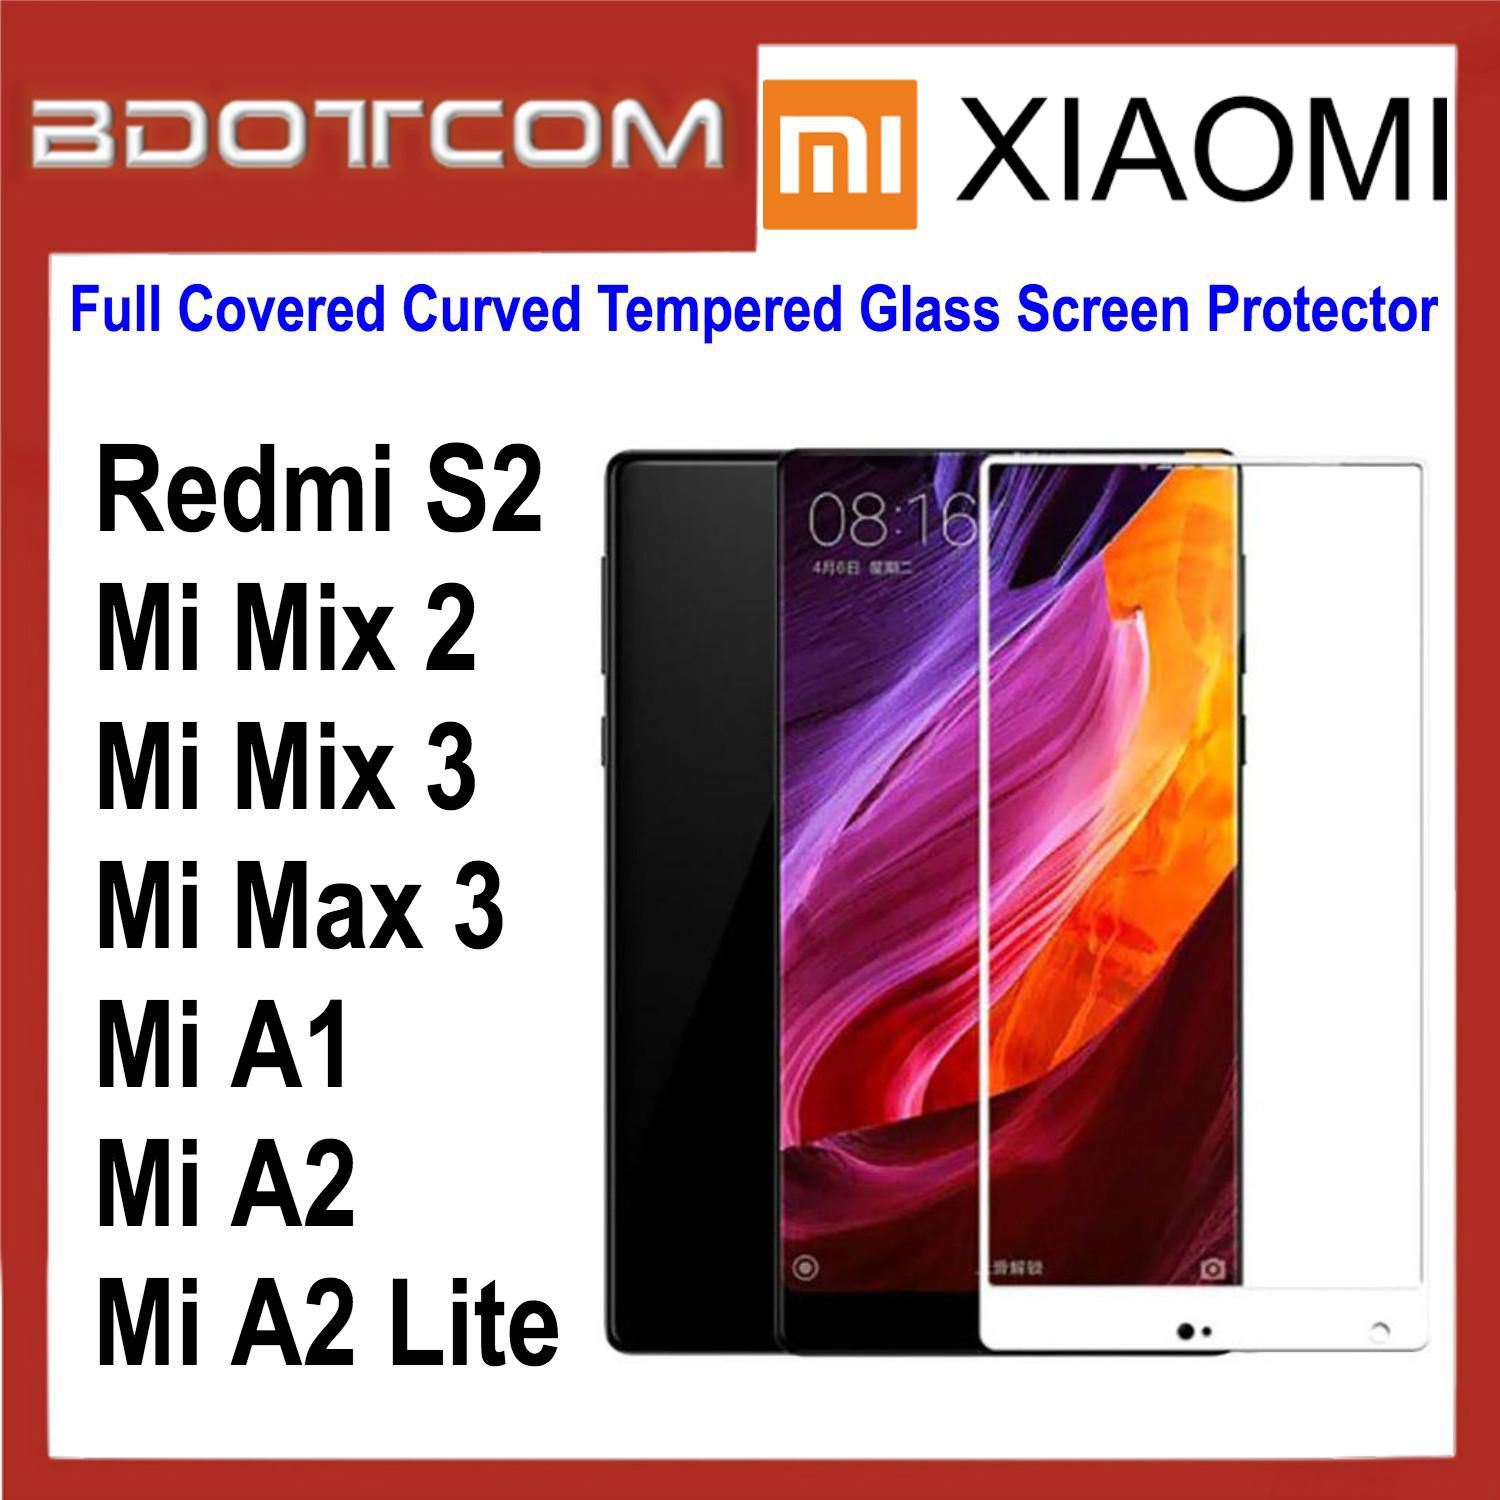 Bdotcom Full Covered Curved Glass Screen Protector for Xiaomi Redmi S2(White)